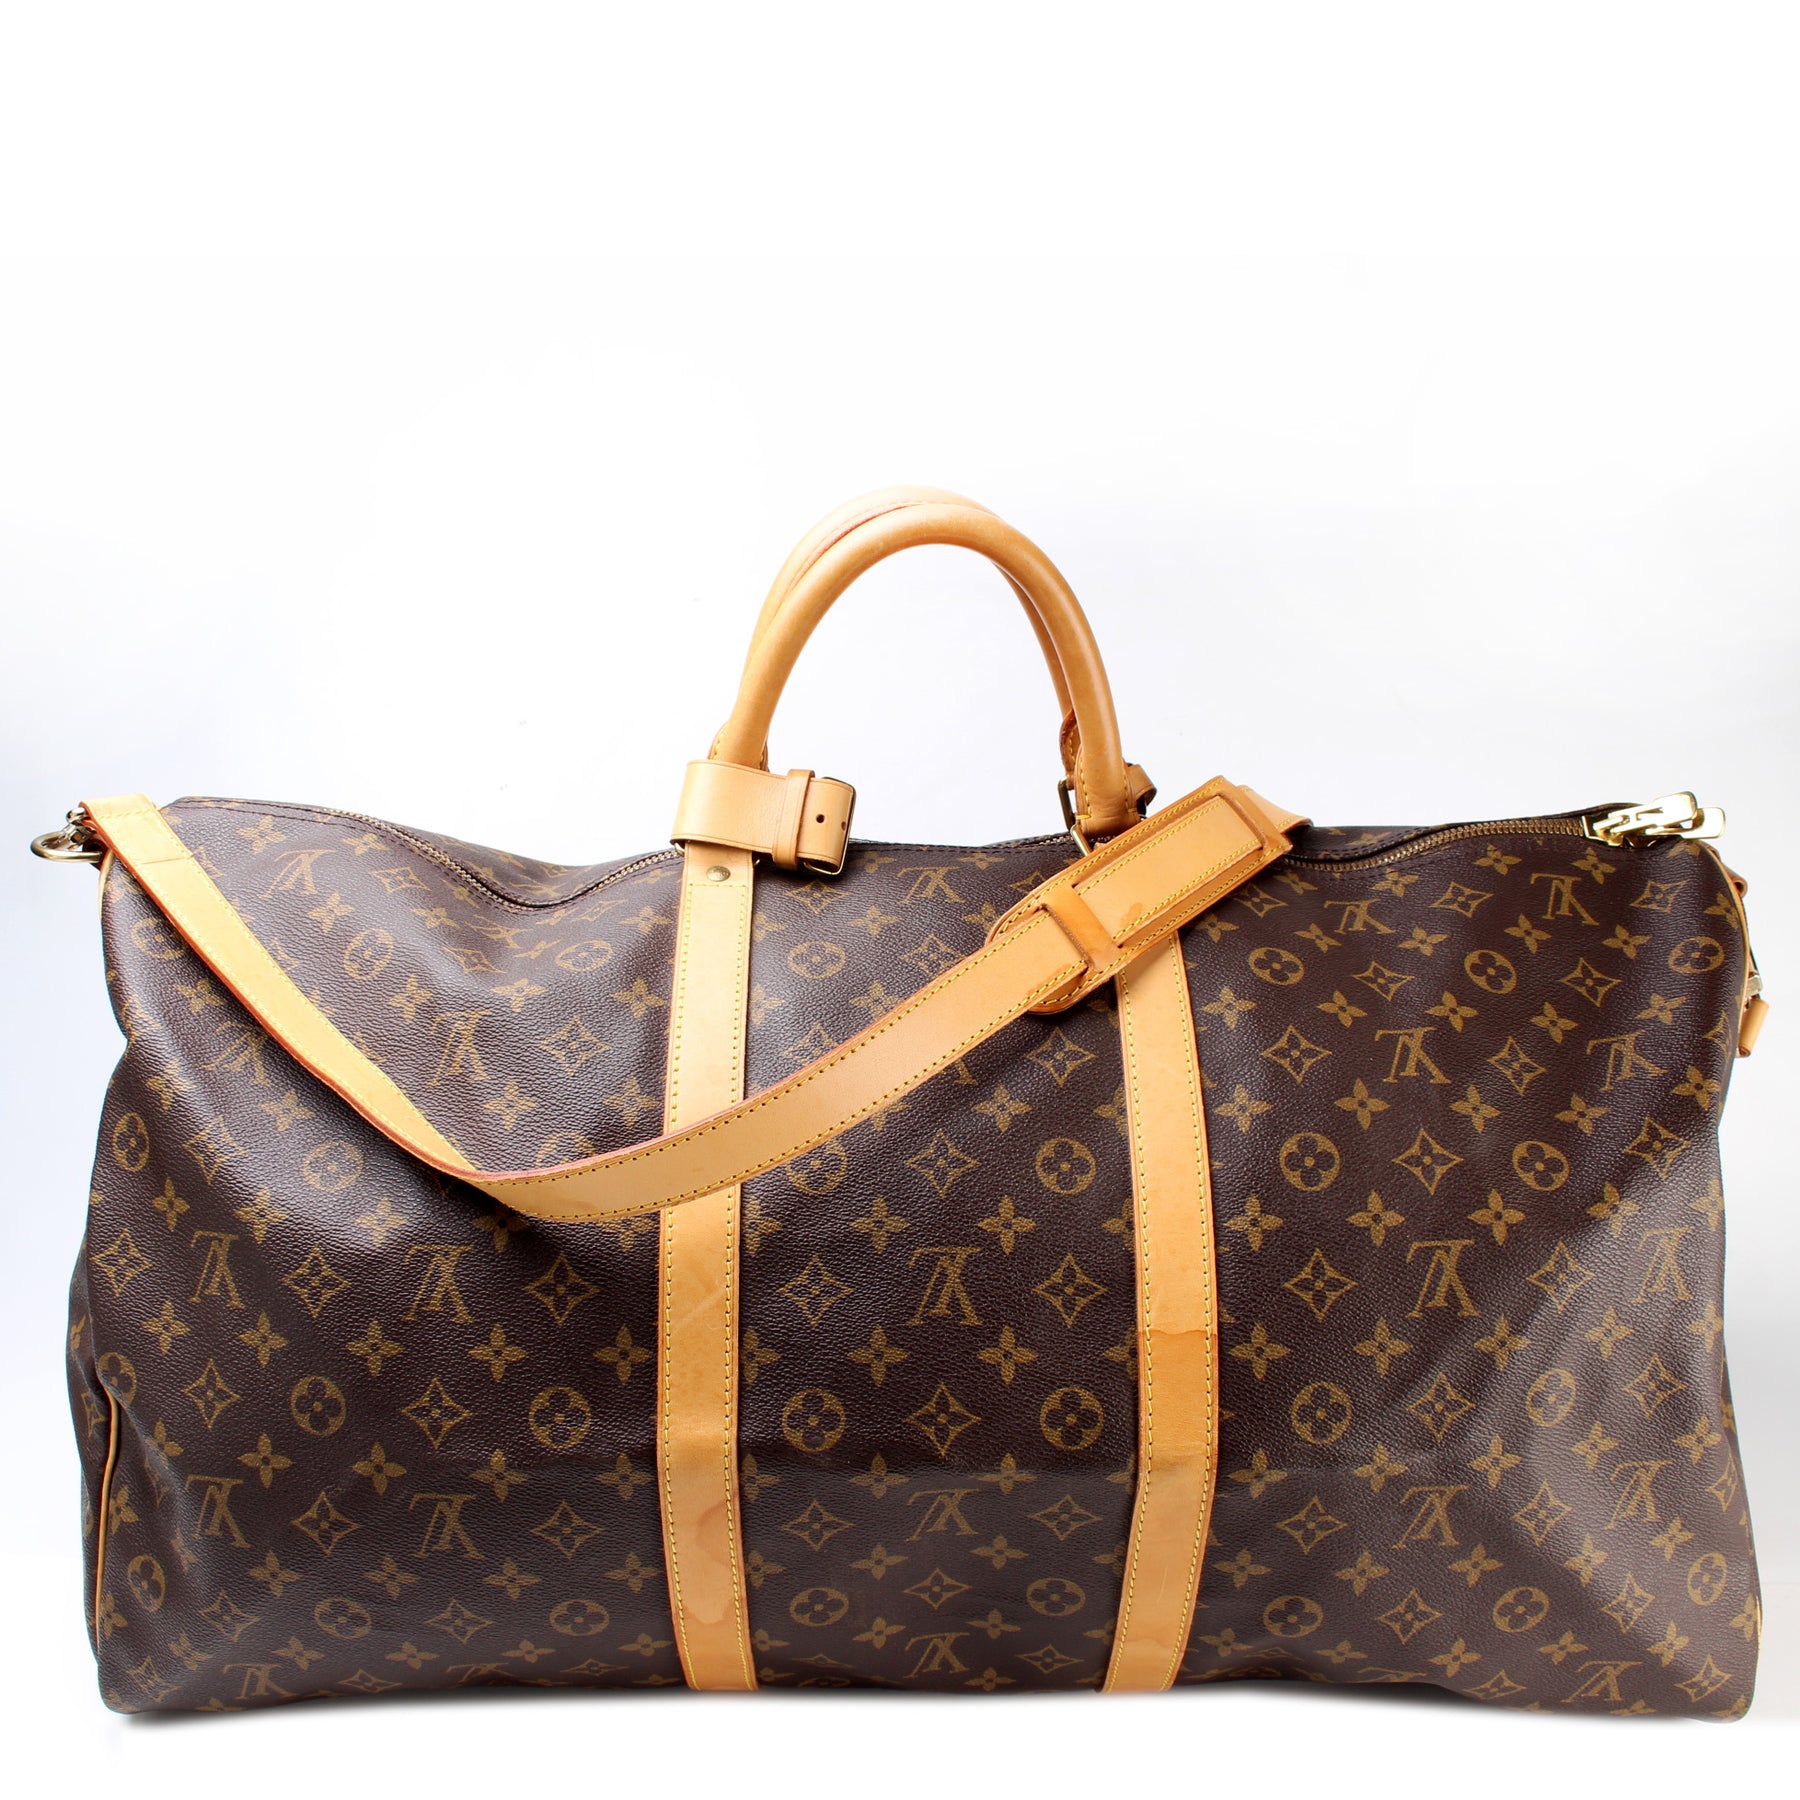 Keepall 60 Monogram Canvas Bandouliere (Authentic Pre-Owned)